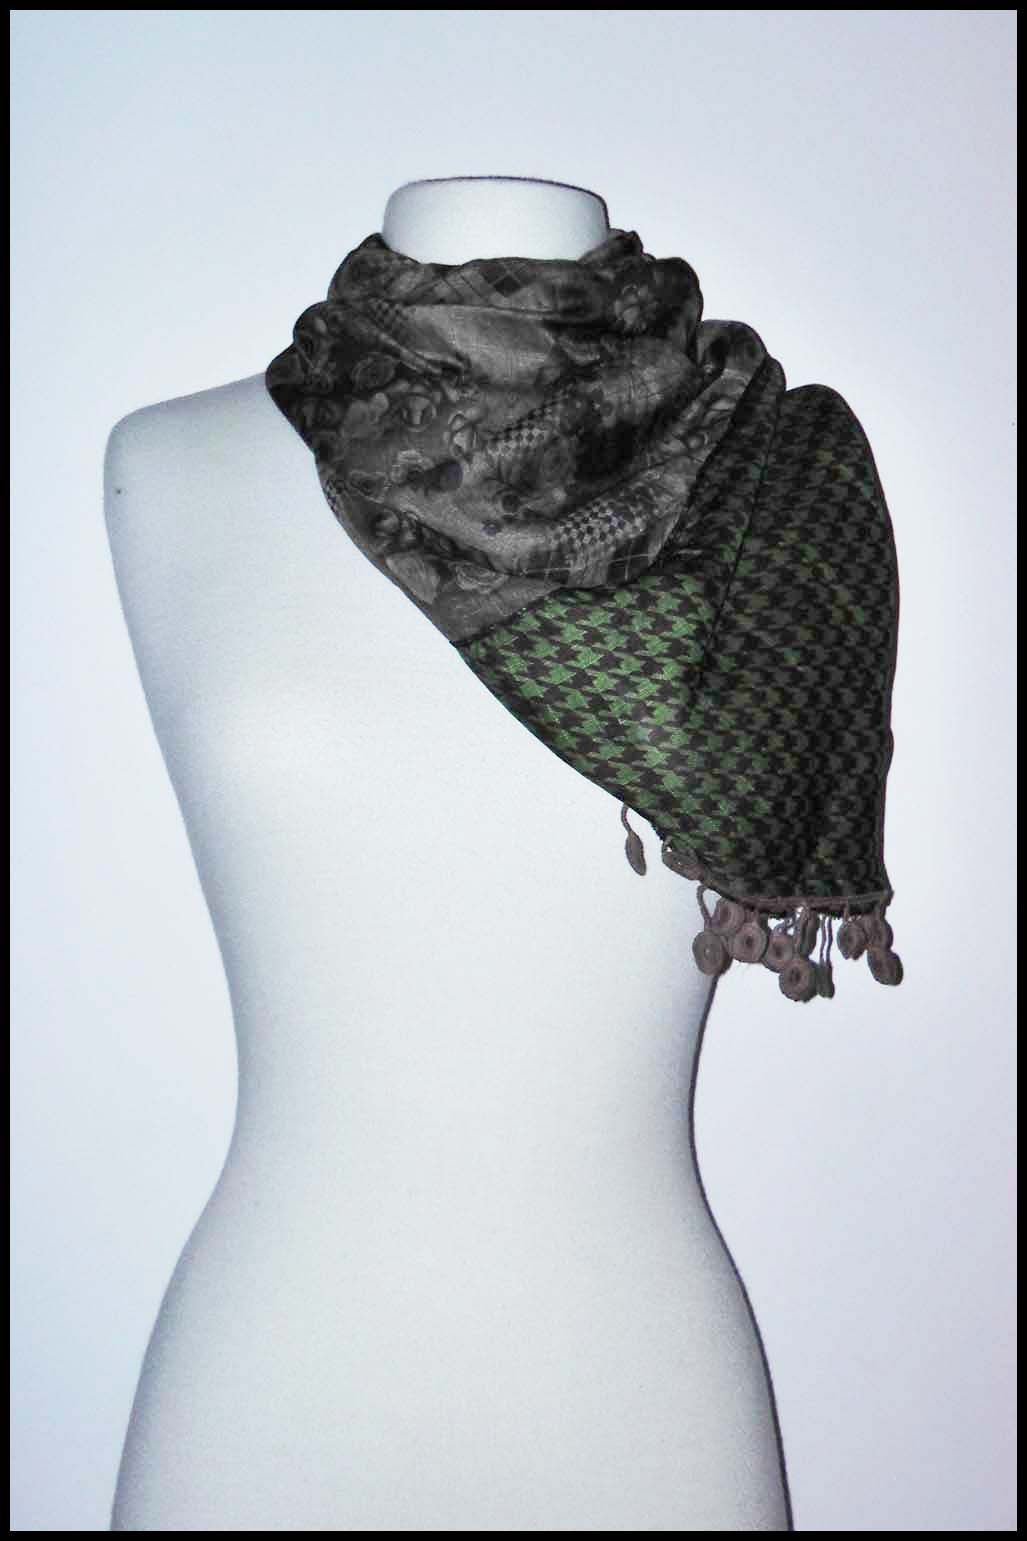 Reversible Faded Floral and Houndstooth Print Scarf